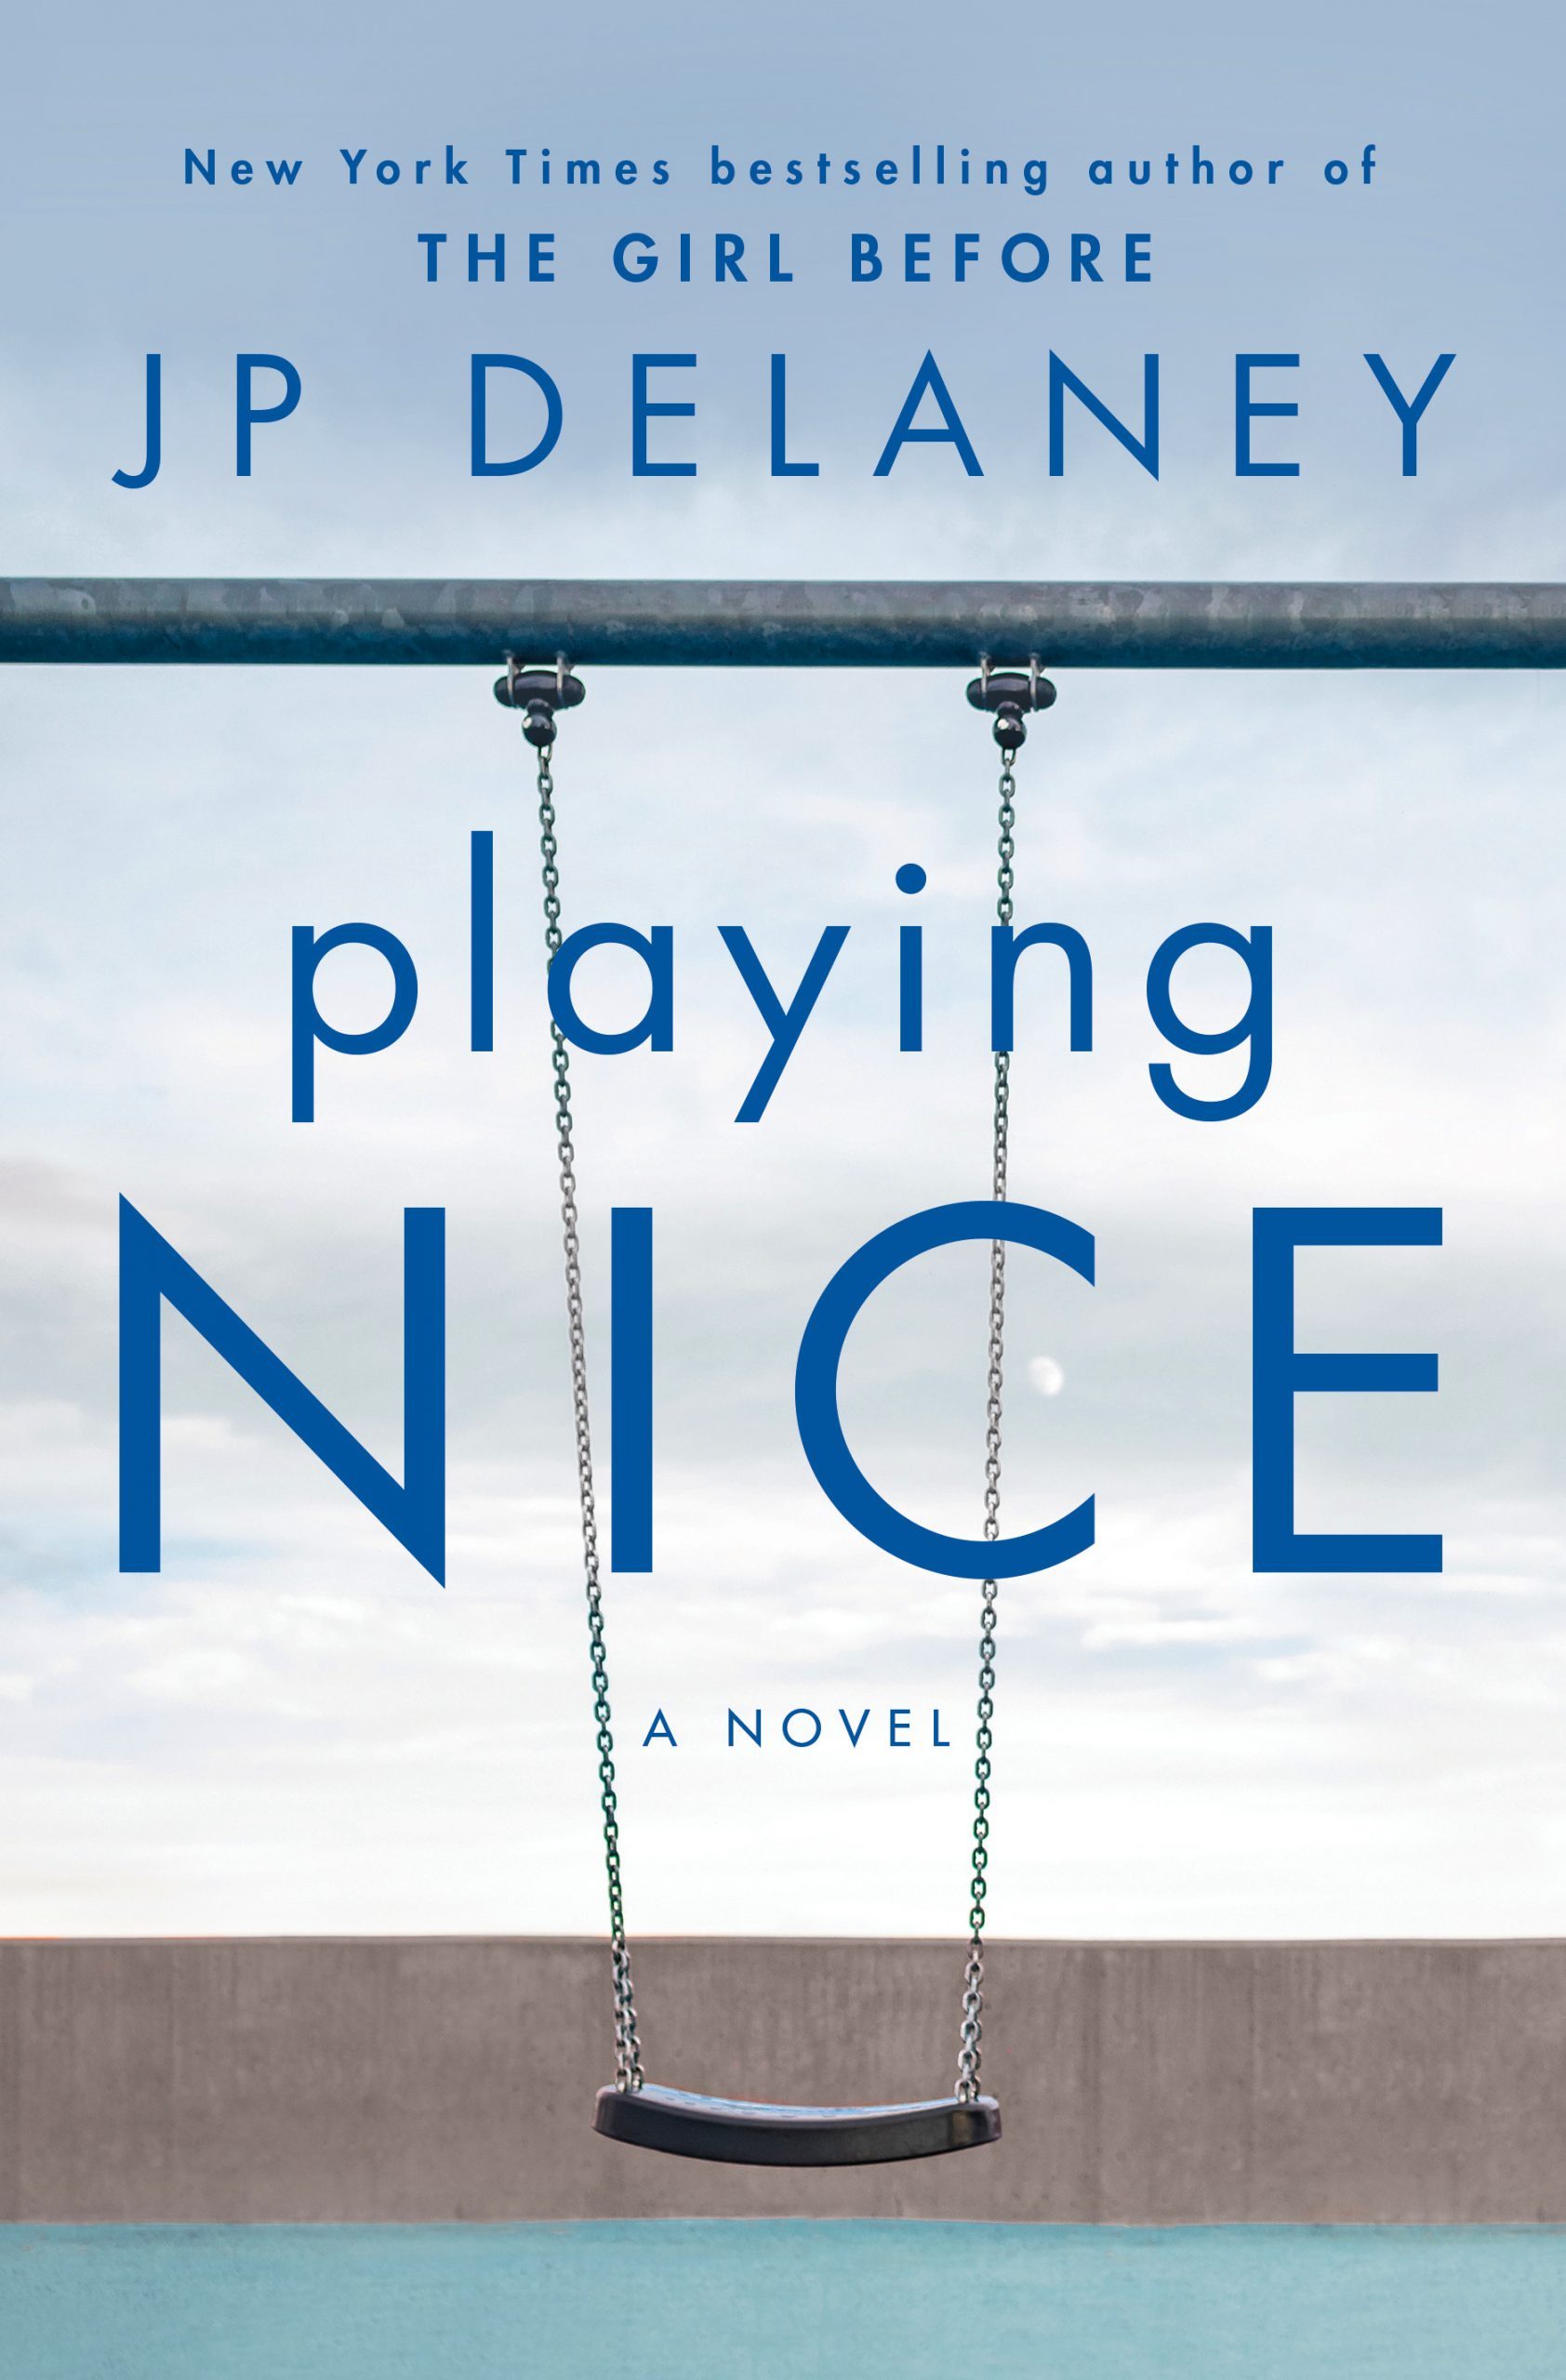 When Will Playing Nice By J.P. Delaney Come Out? 2020 Mystery Thriller Releases